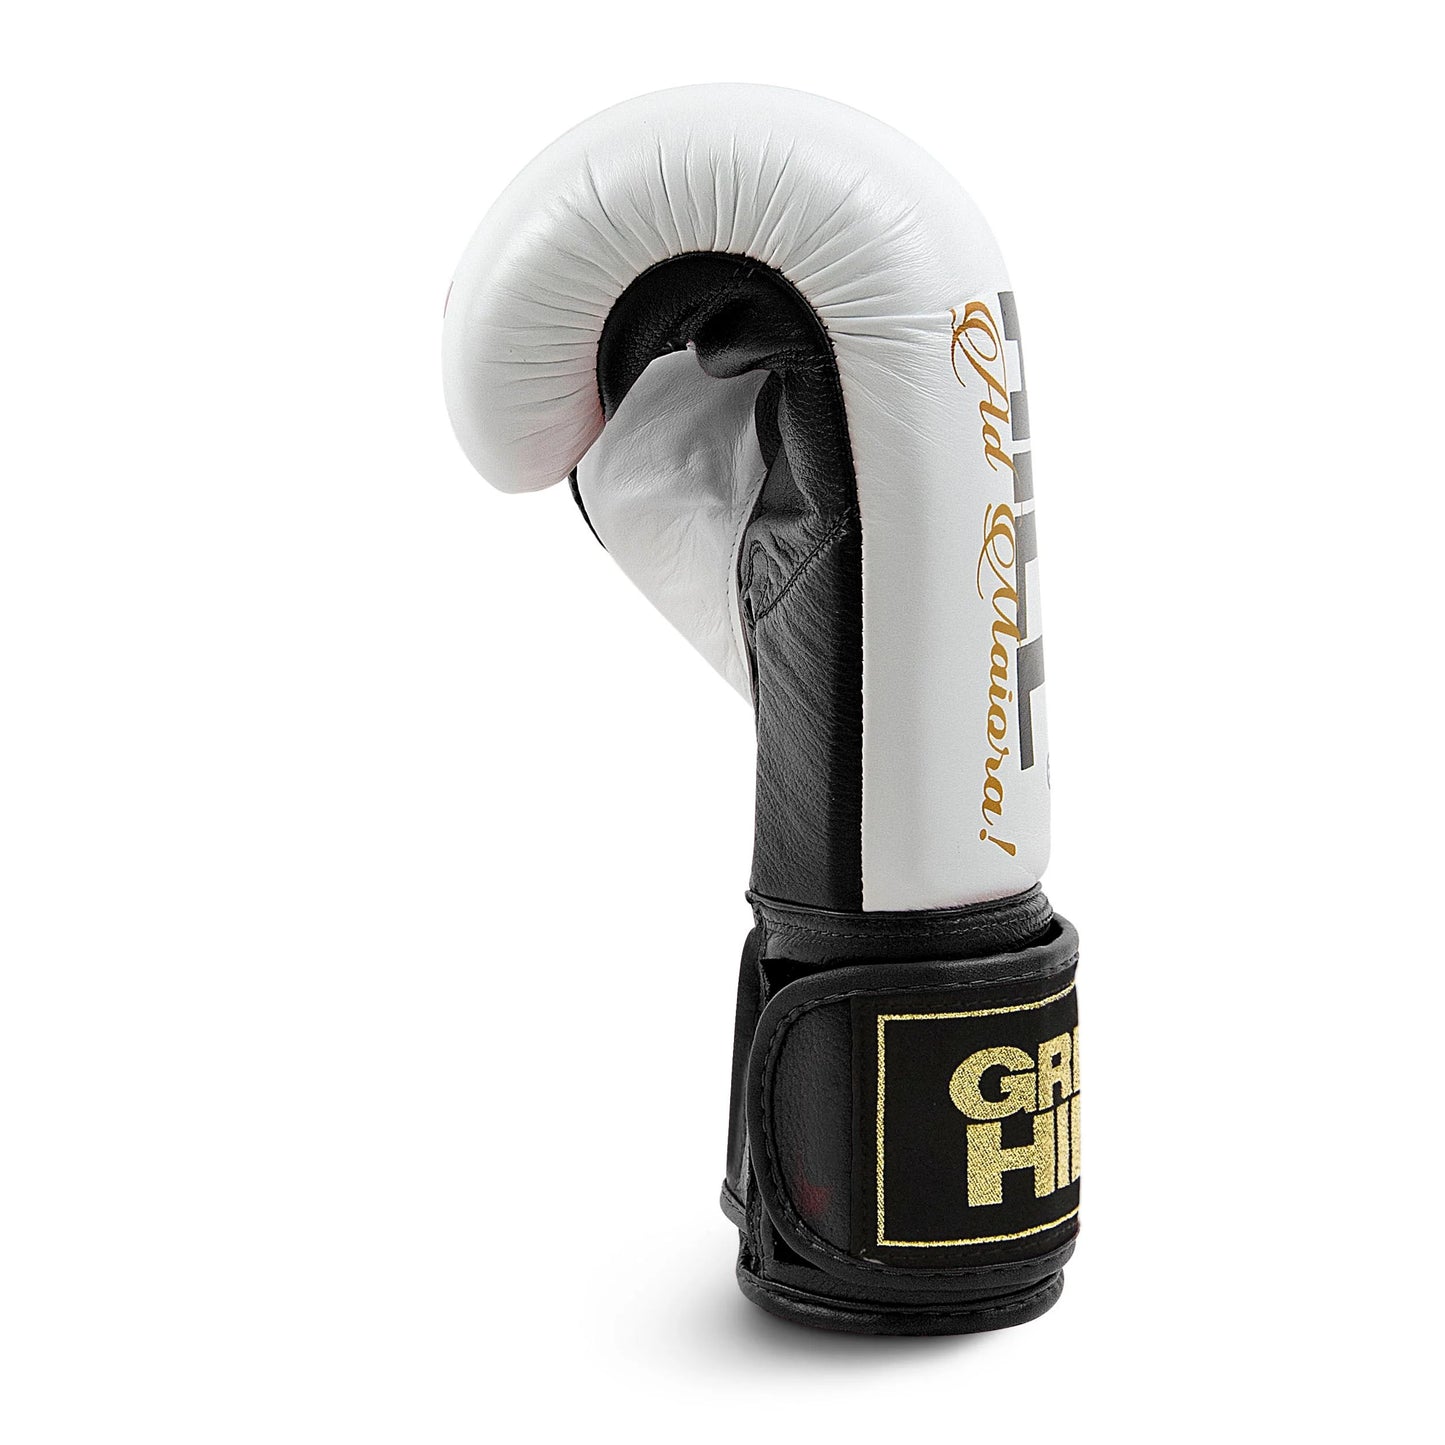 Boxing Gloves “LEGEND”  GOLD EDITION